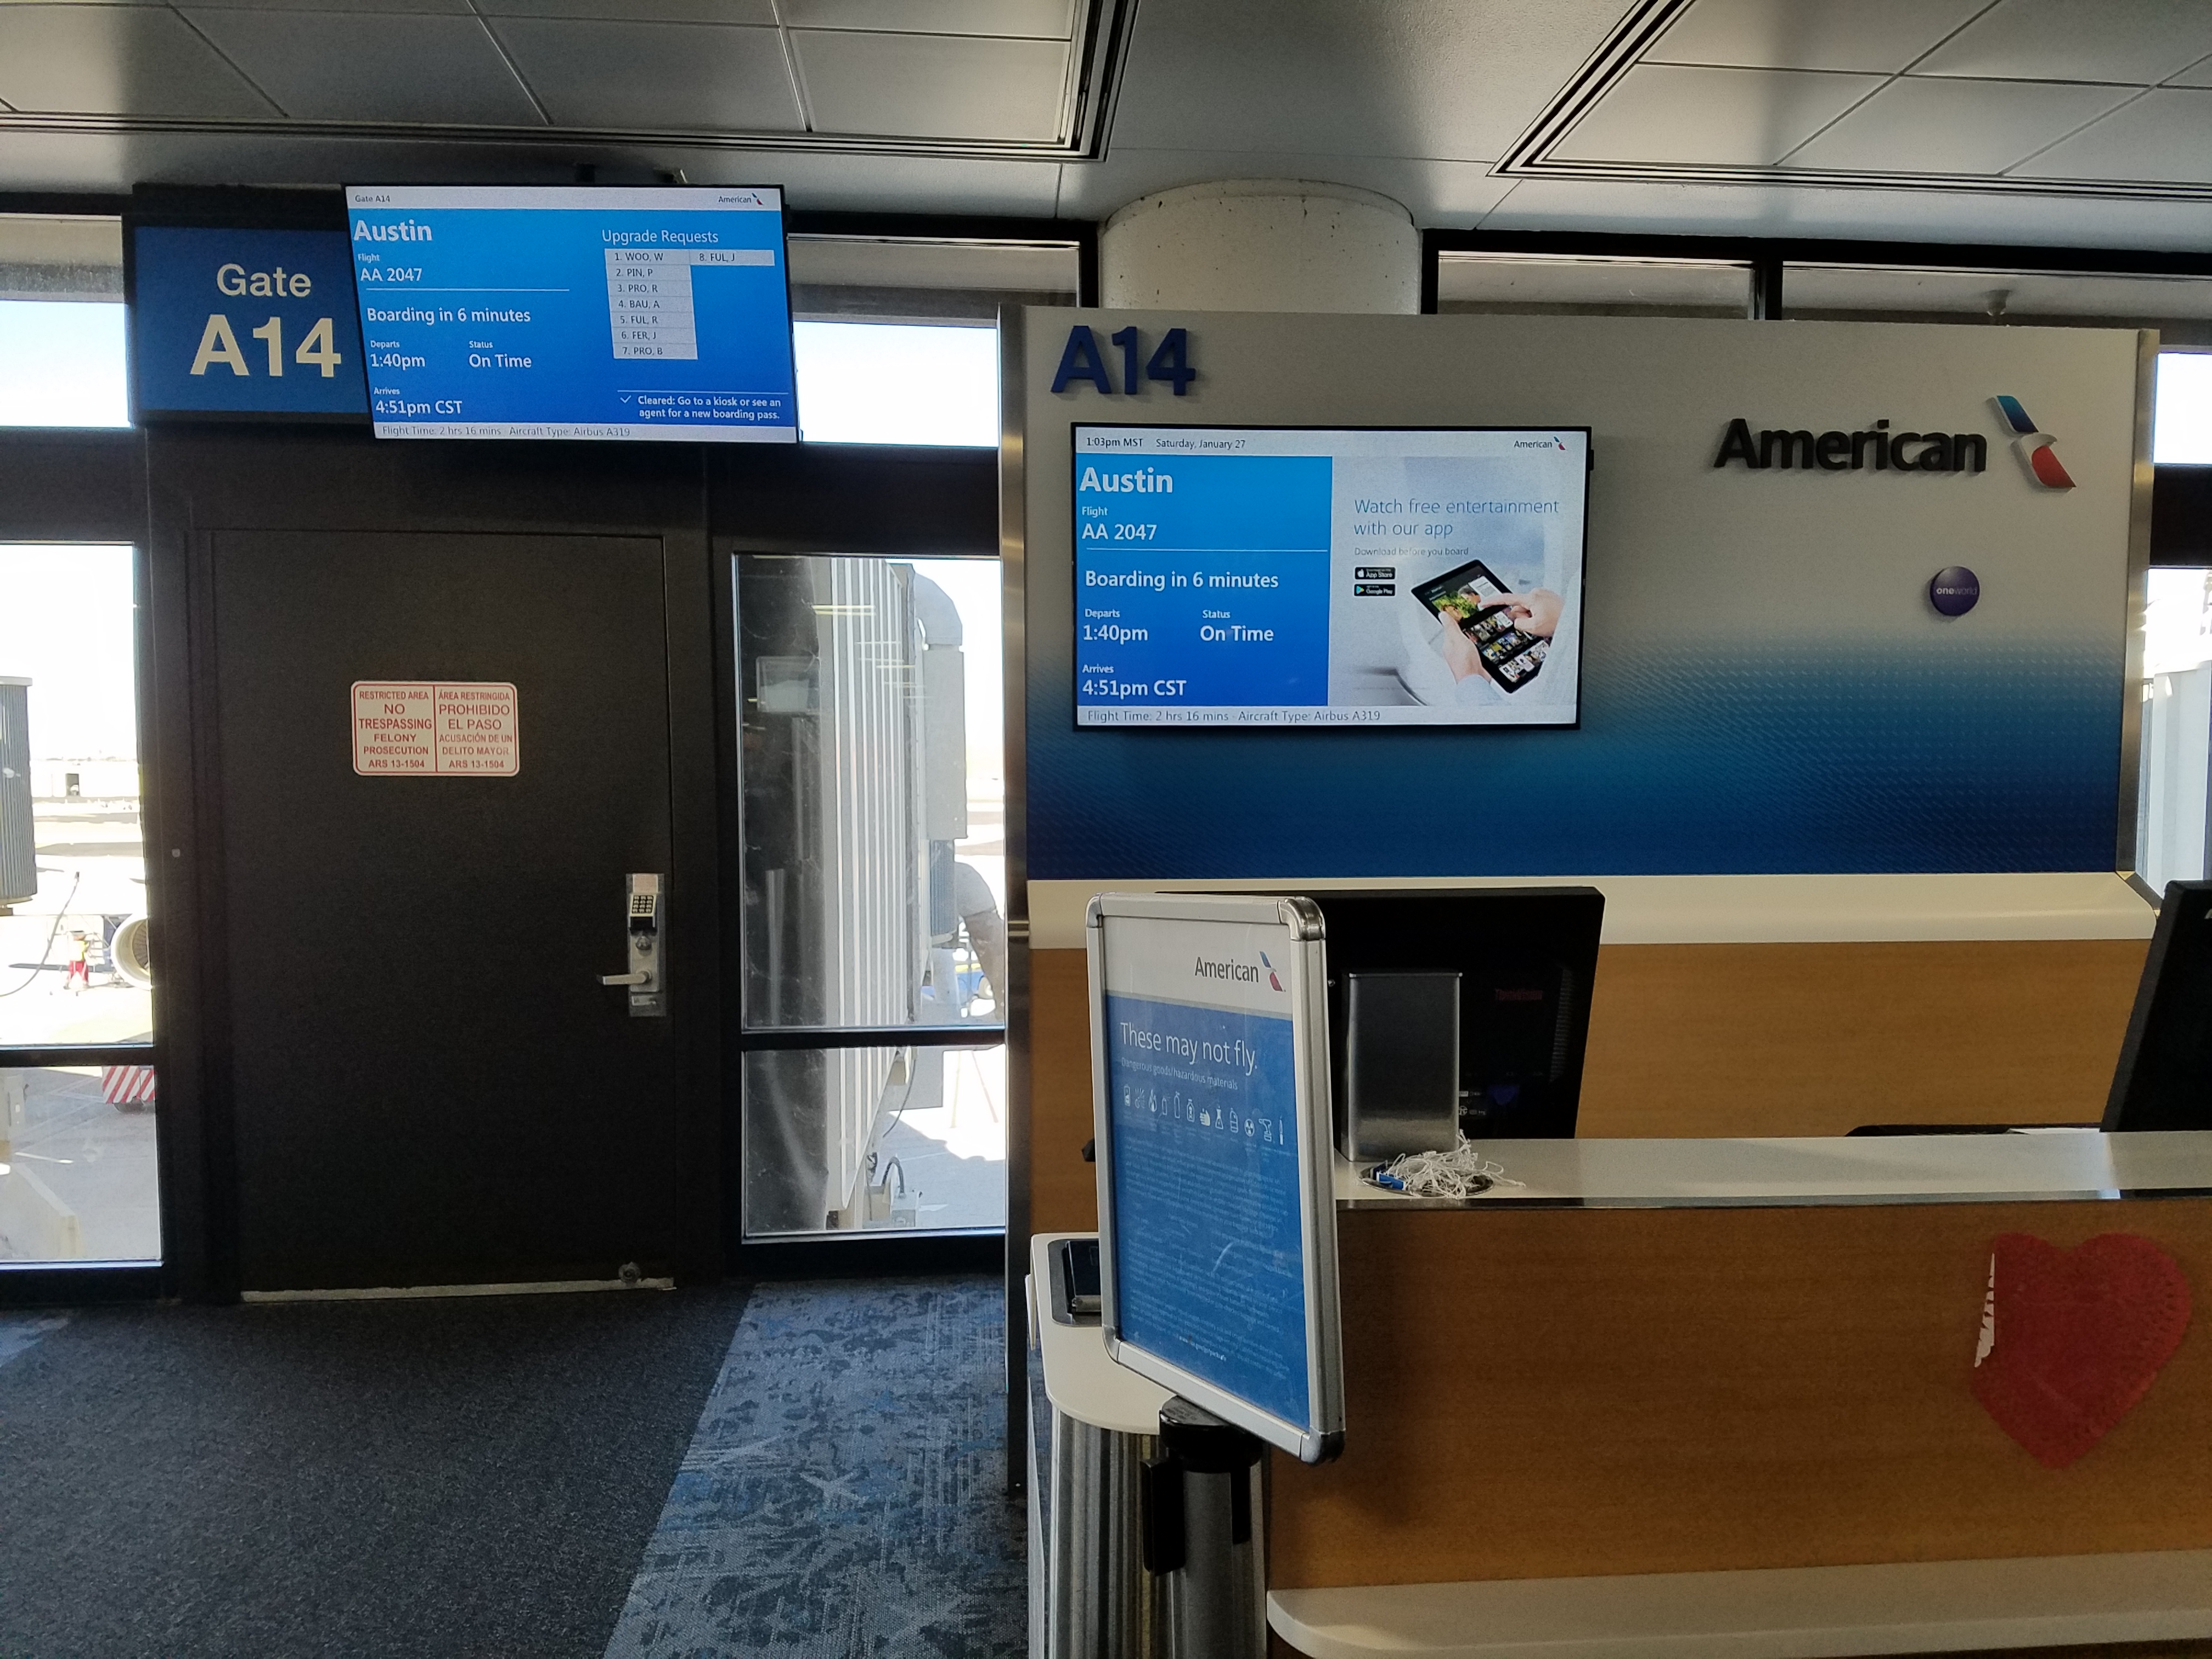 On June 30th American Airlines Will Revise Its Boarding Groups